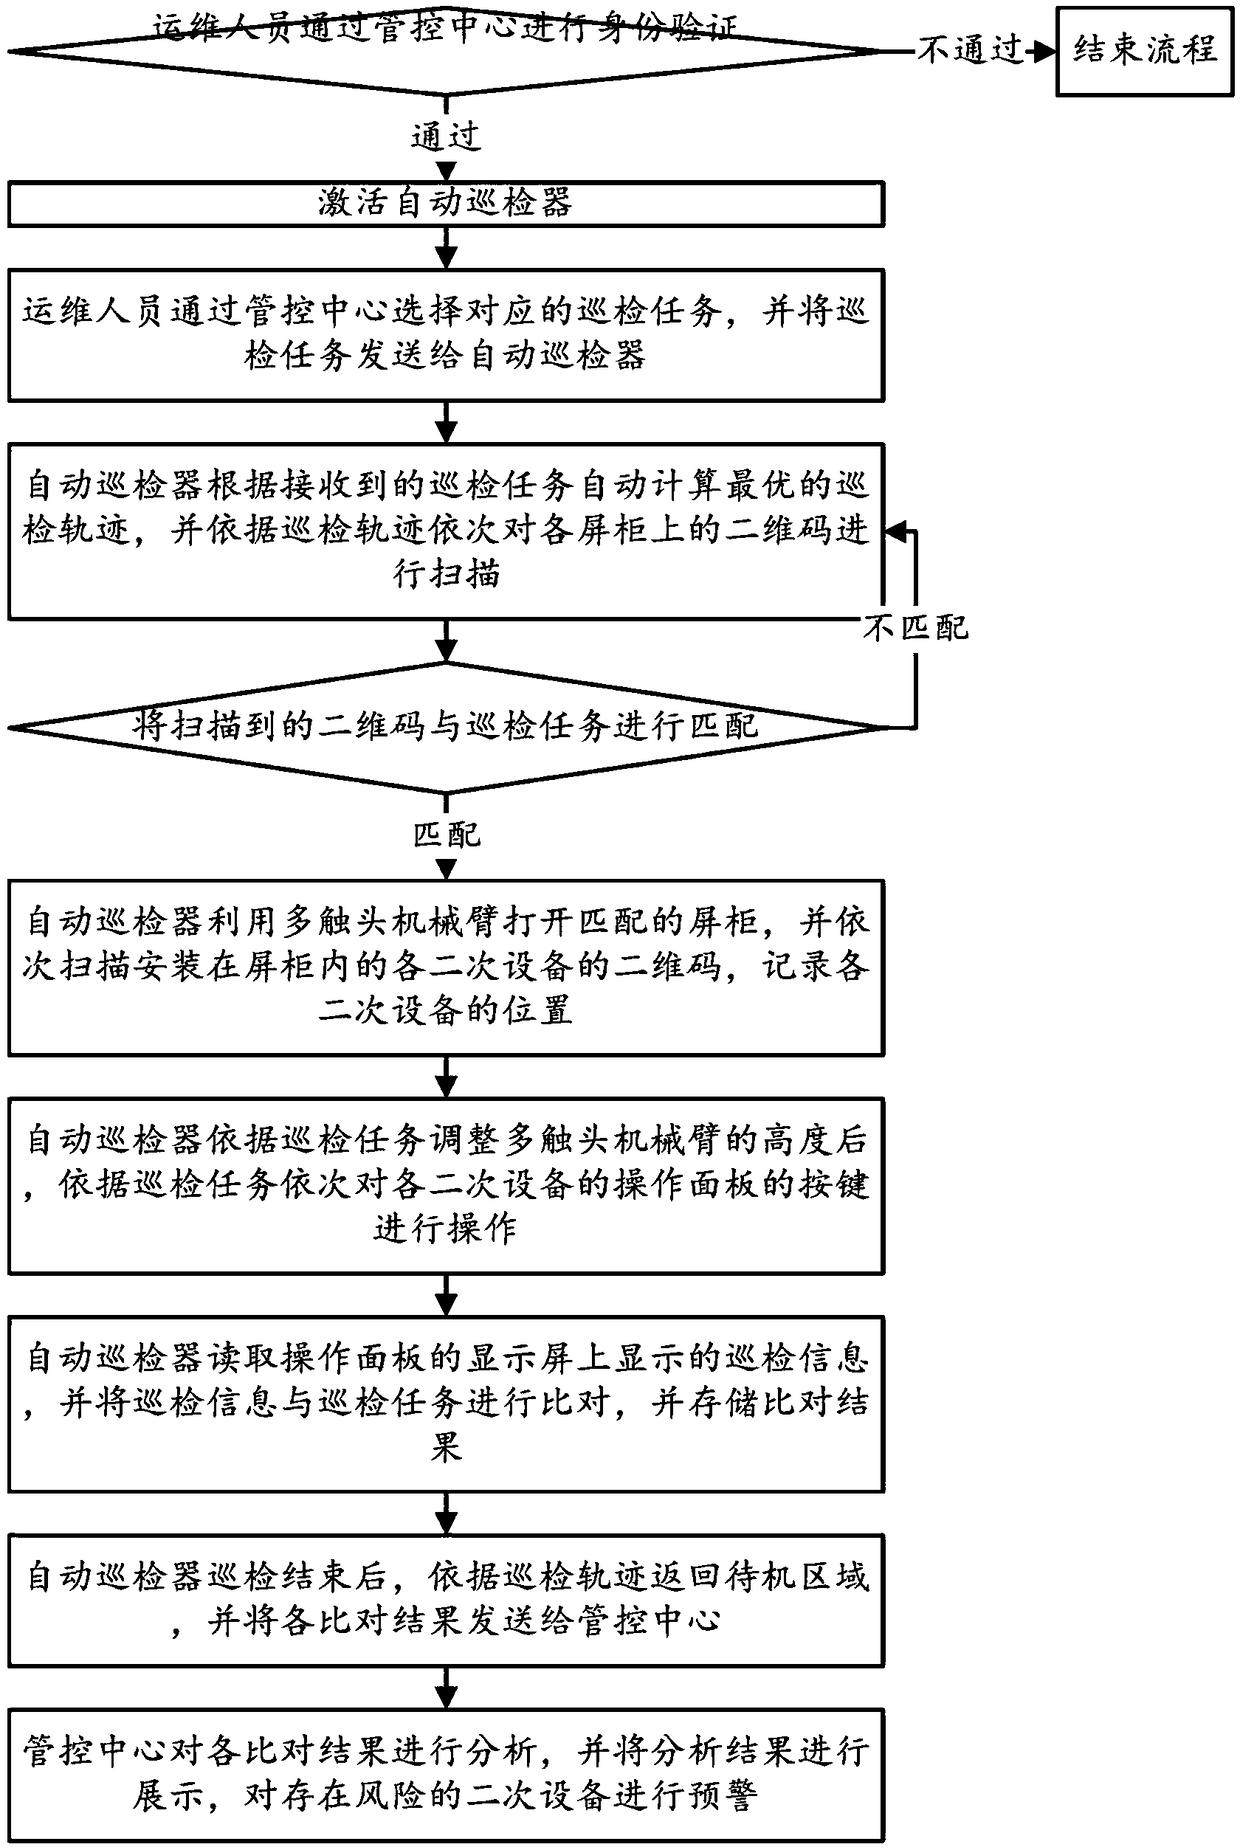 Automatic patrol inspection method and system for the secondary equipment of an intelligent substation